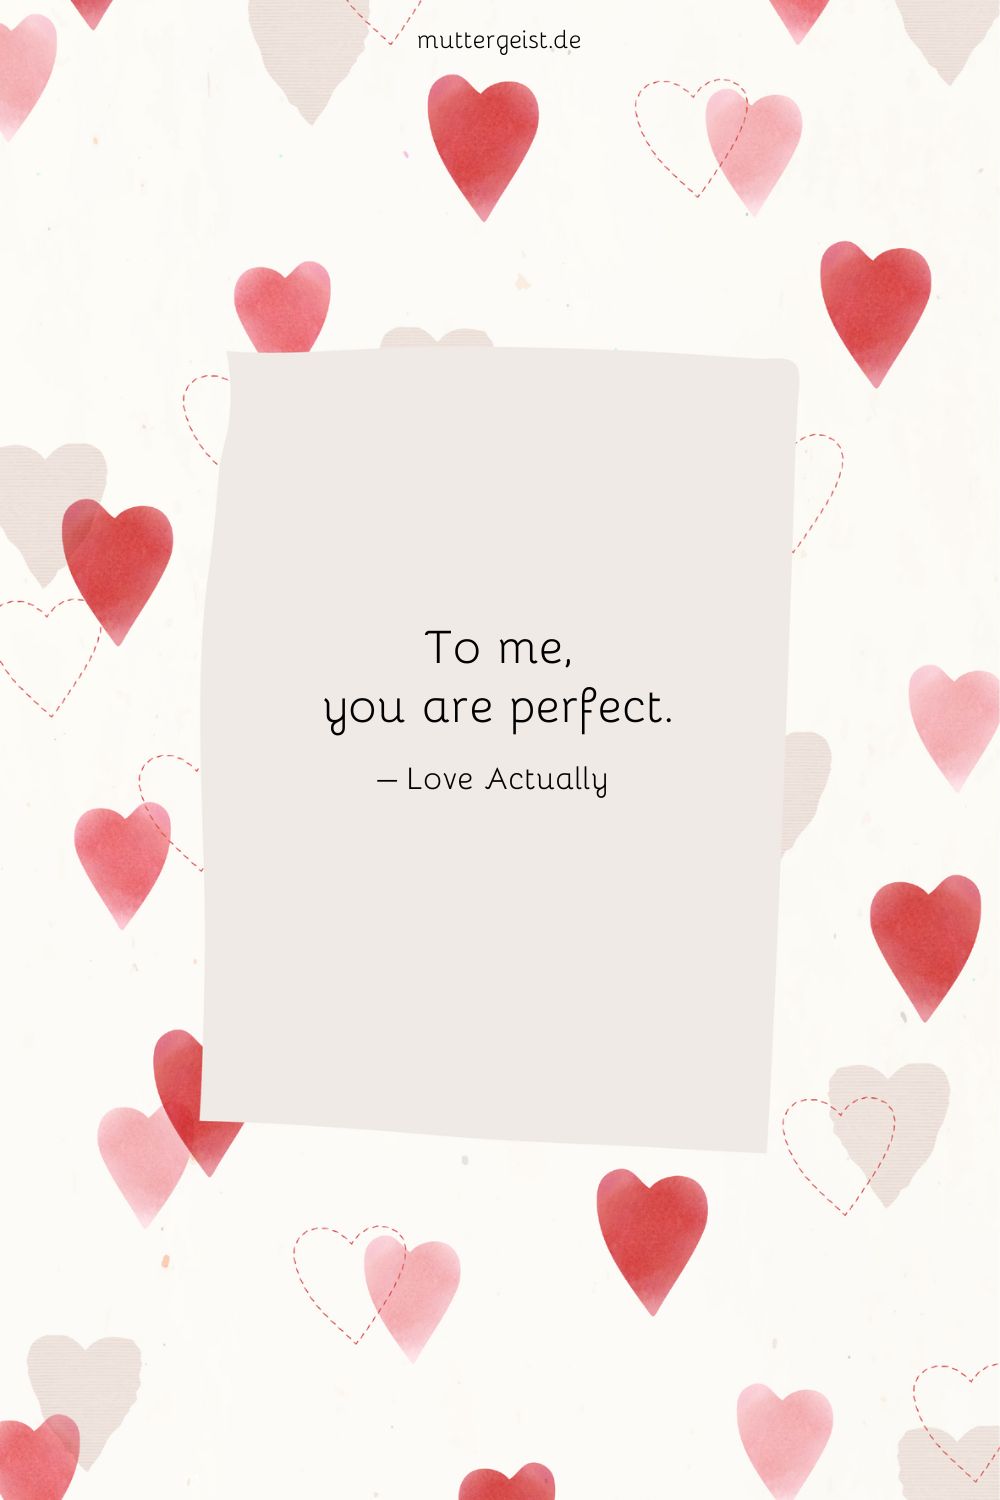 To me, you are perfect.